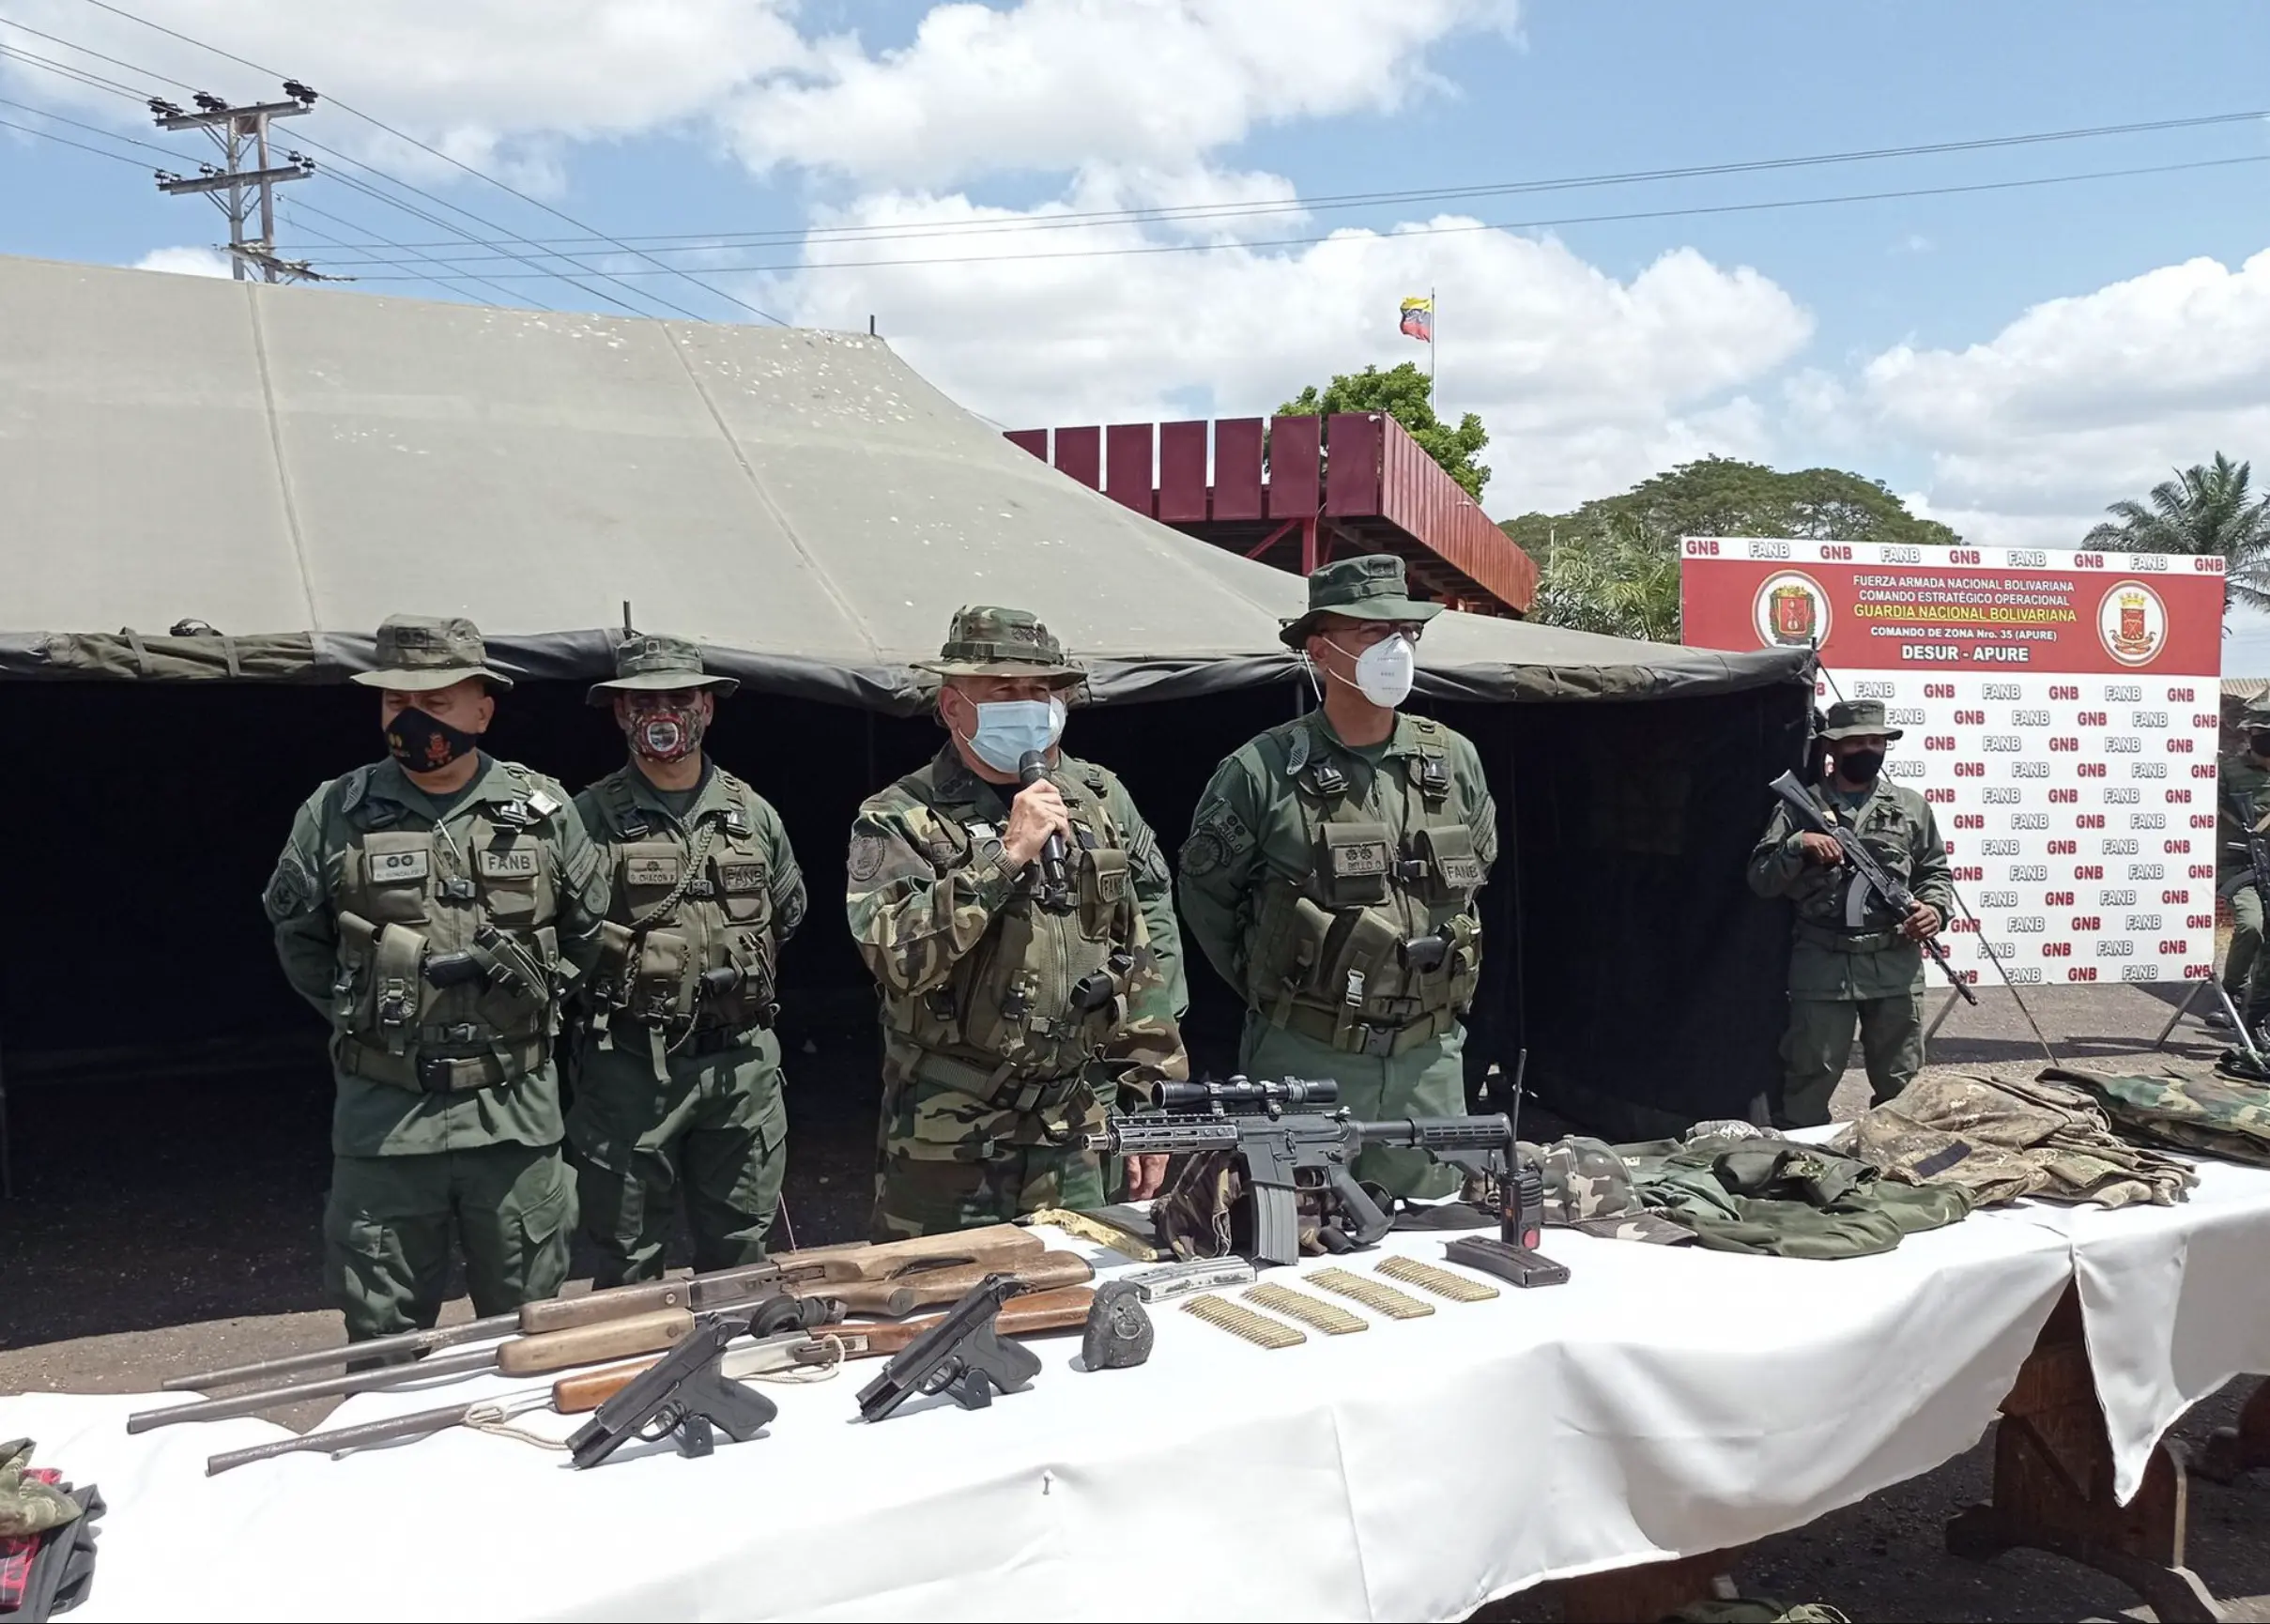 five uniformed men stand behind a table set up in front of a military-style tent. On the table, there are rifles, pistols, bullets, and green military uniforms. In the background, there is a backdrop for photos that reads, in Spanish, "National Bolivarian Armed Forces, Strategic Operational Command, Bolivarian National Guard. Command of Zone number 35 (Apure). DESUR - APURE"